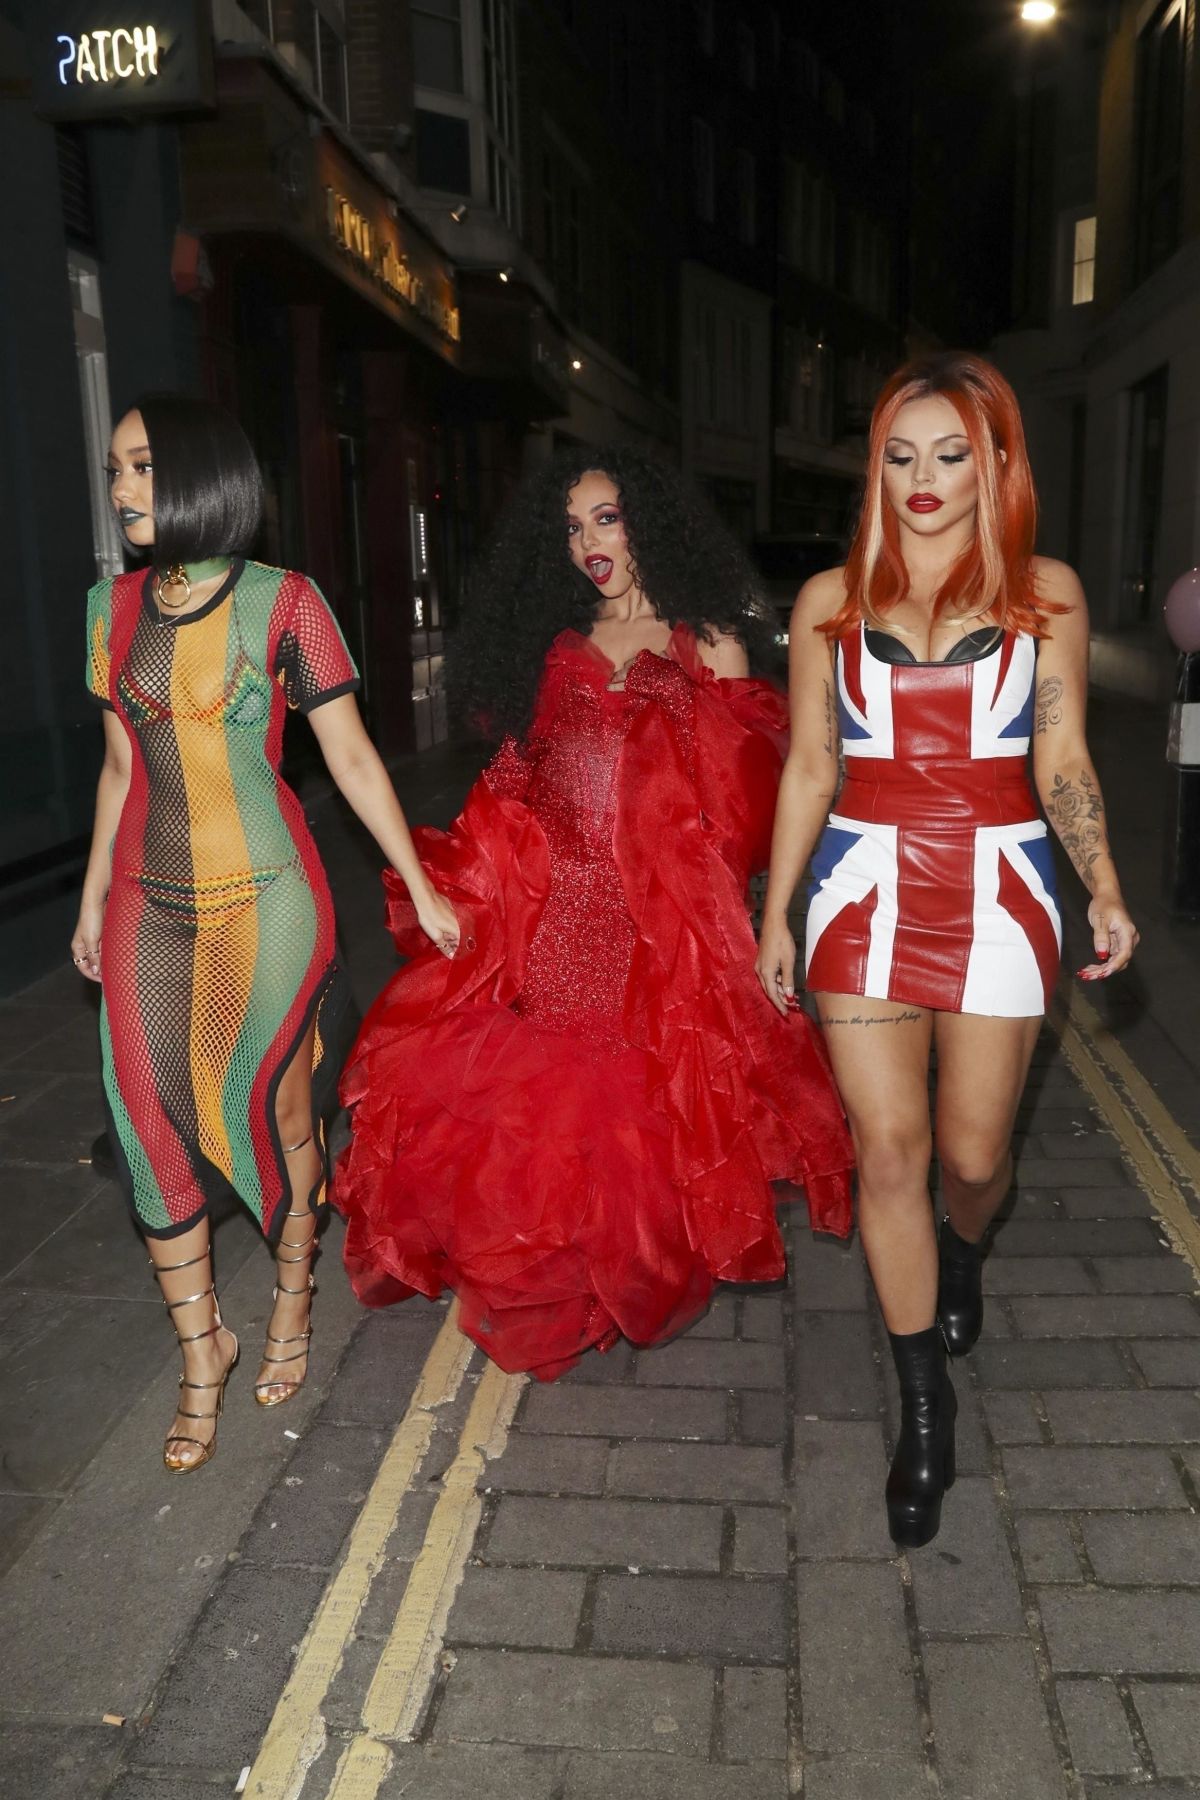 Jesy Nelson Jade Thirlwall And Leigh Anne Pinnock At Jade Thirlwall S Birthday Party In London